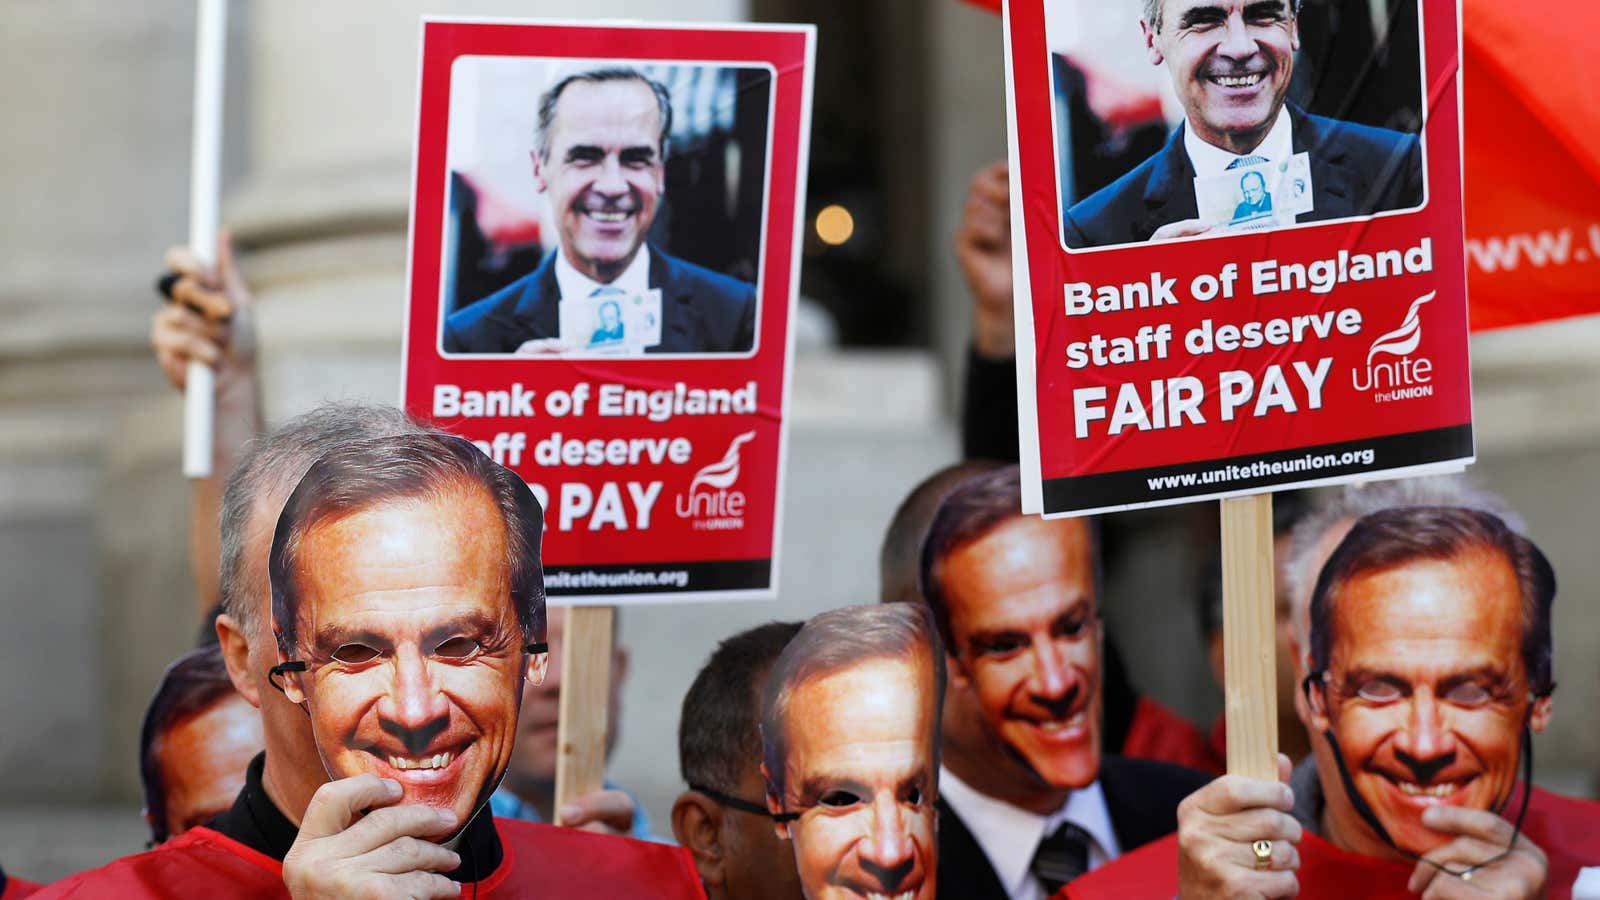 Bank of England workers strike for pay rises.